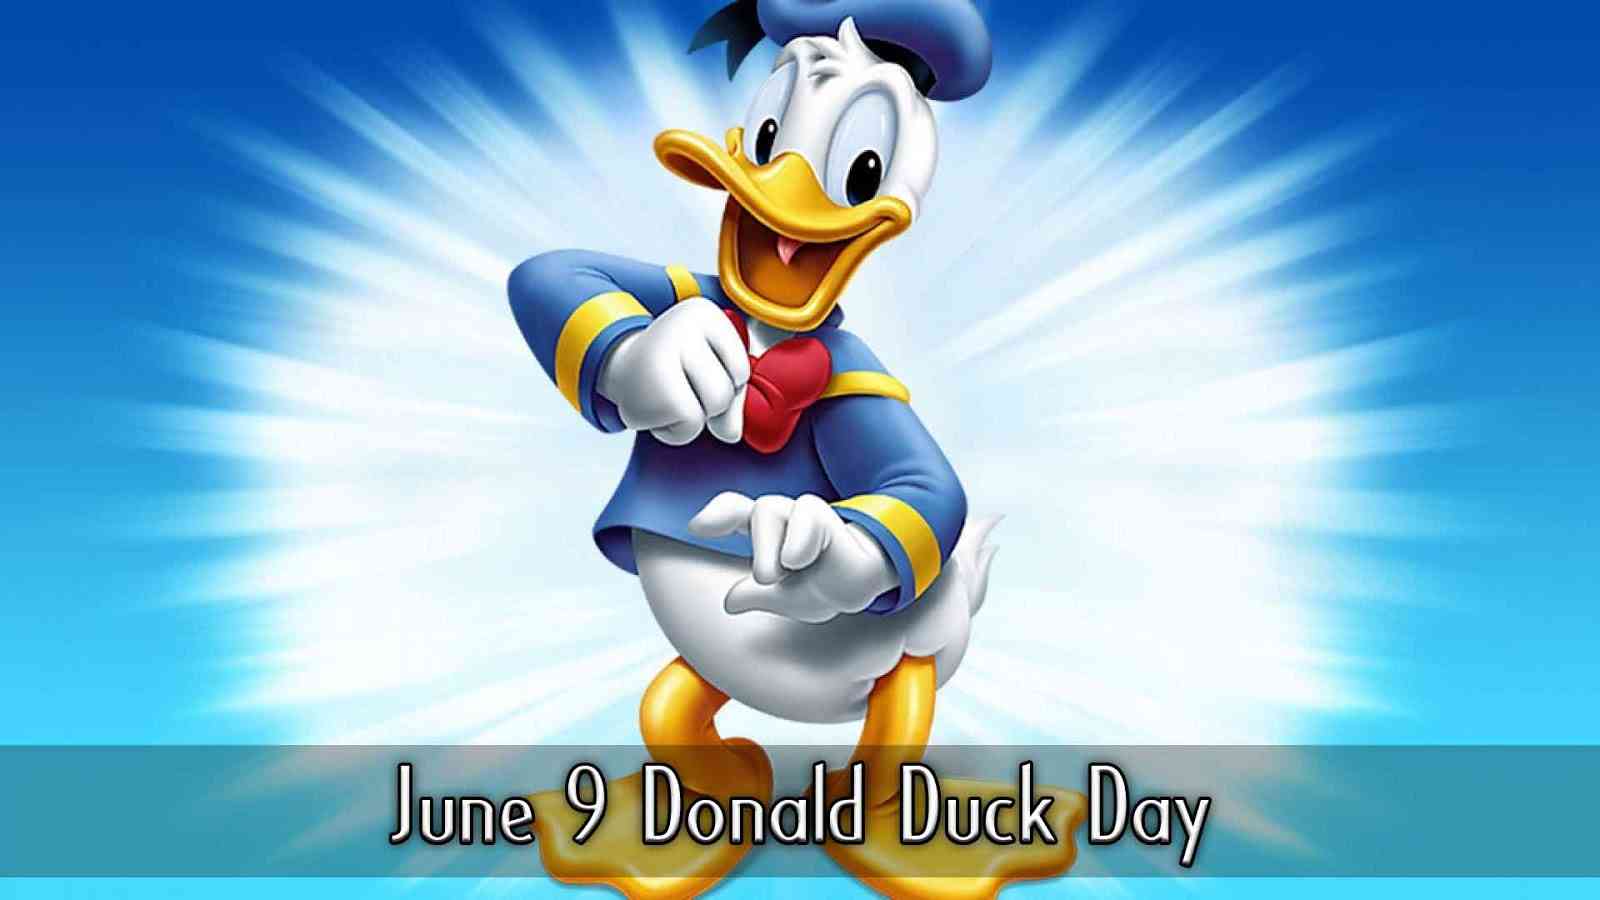 Donald Duck Day 2022: Date, History, How to Celebrate